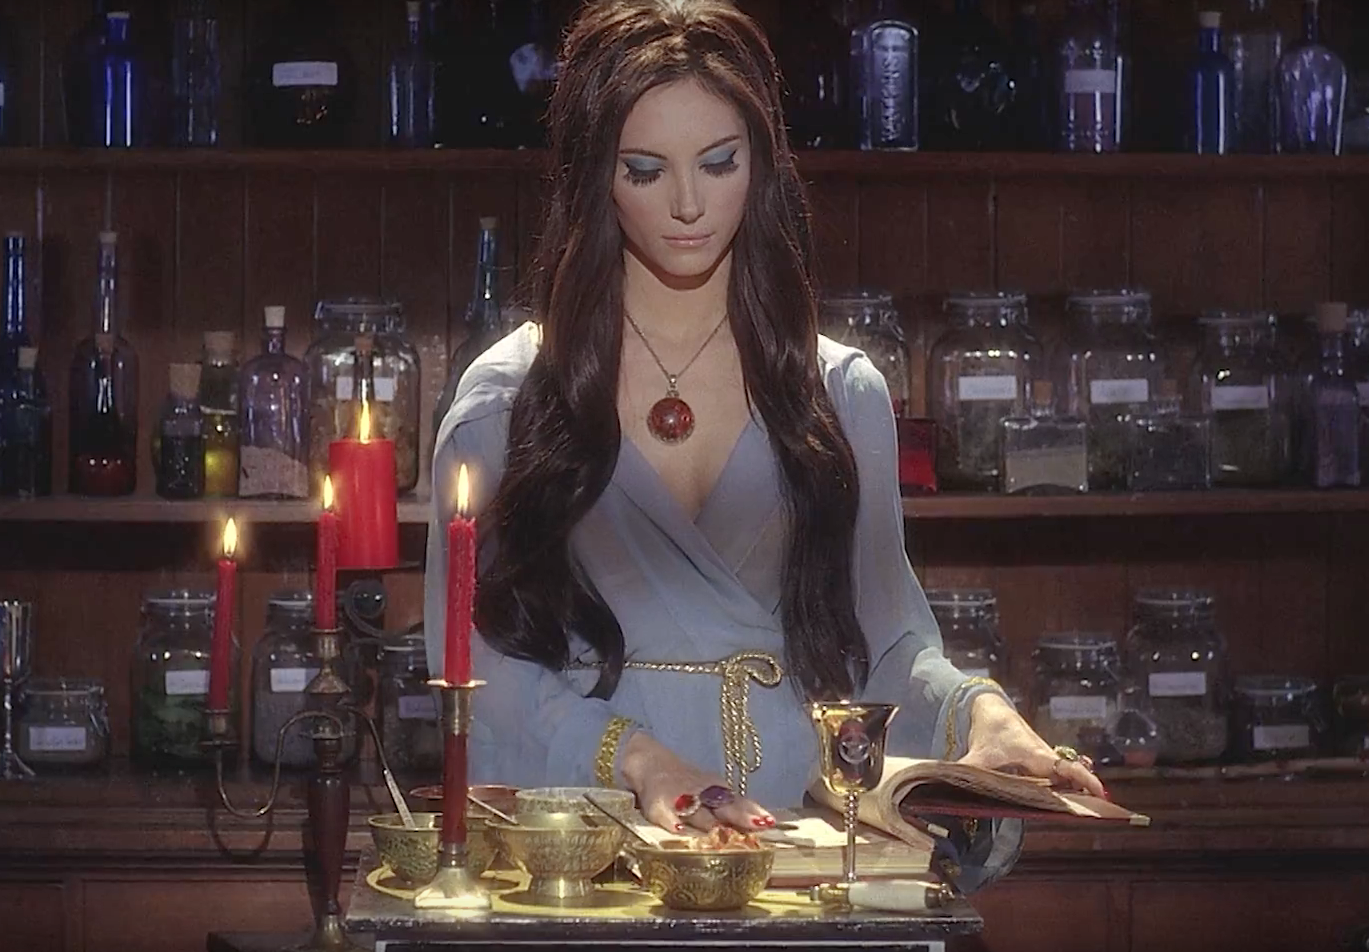 Still from the movie "Love Witch"